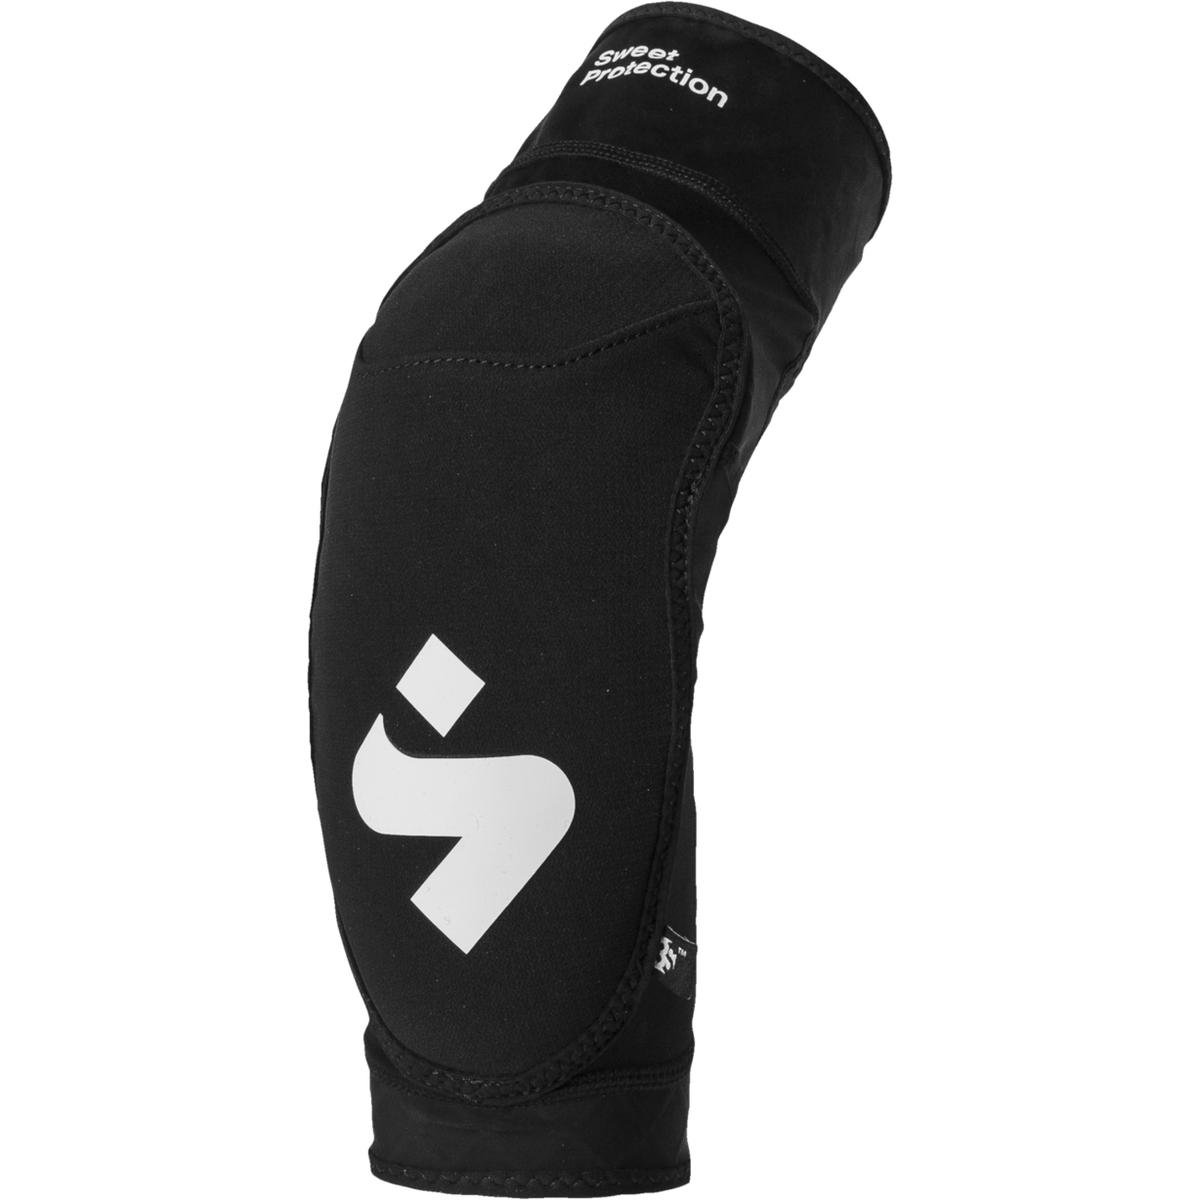 Sweet Protection Elbow Guards Pro